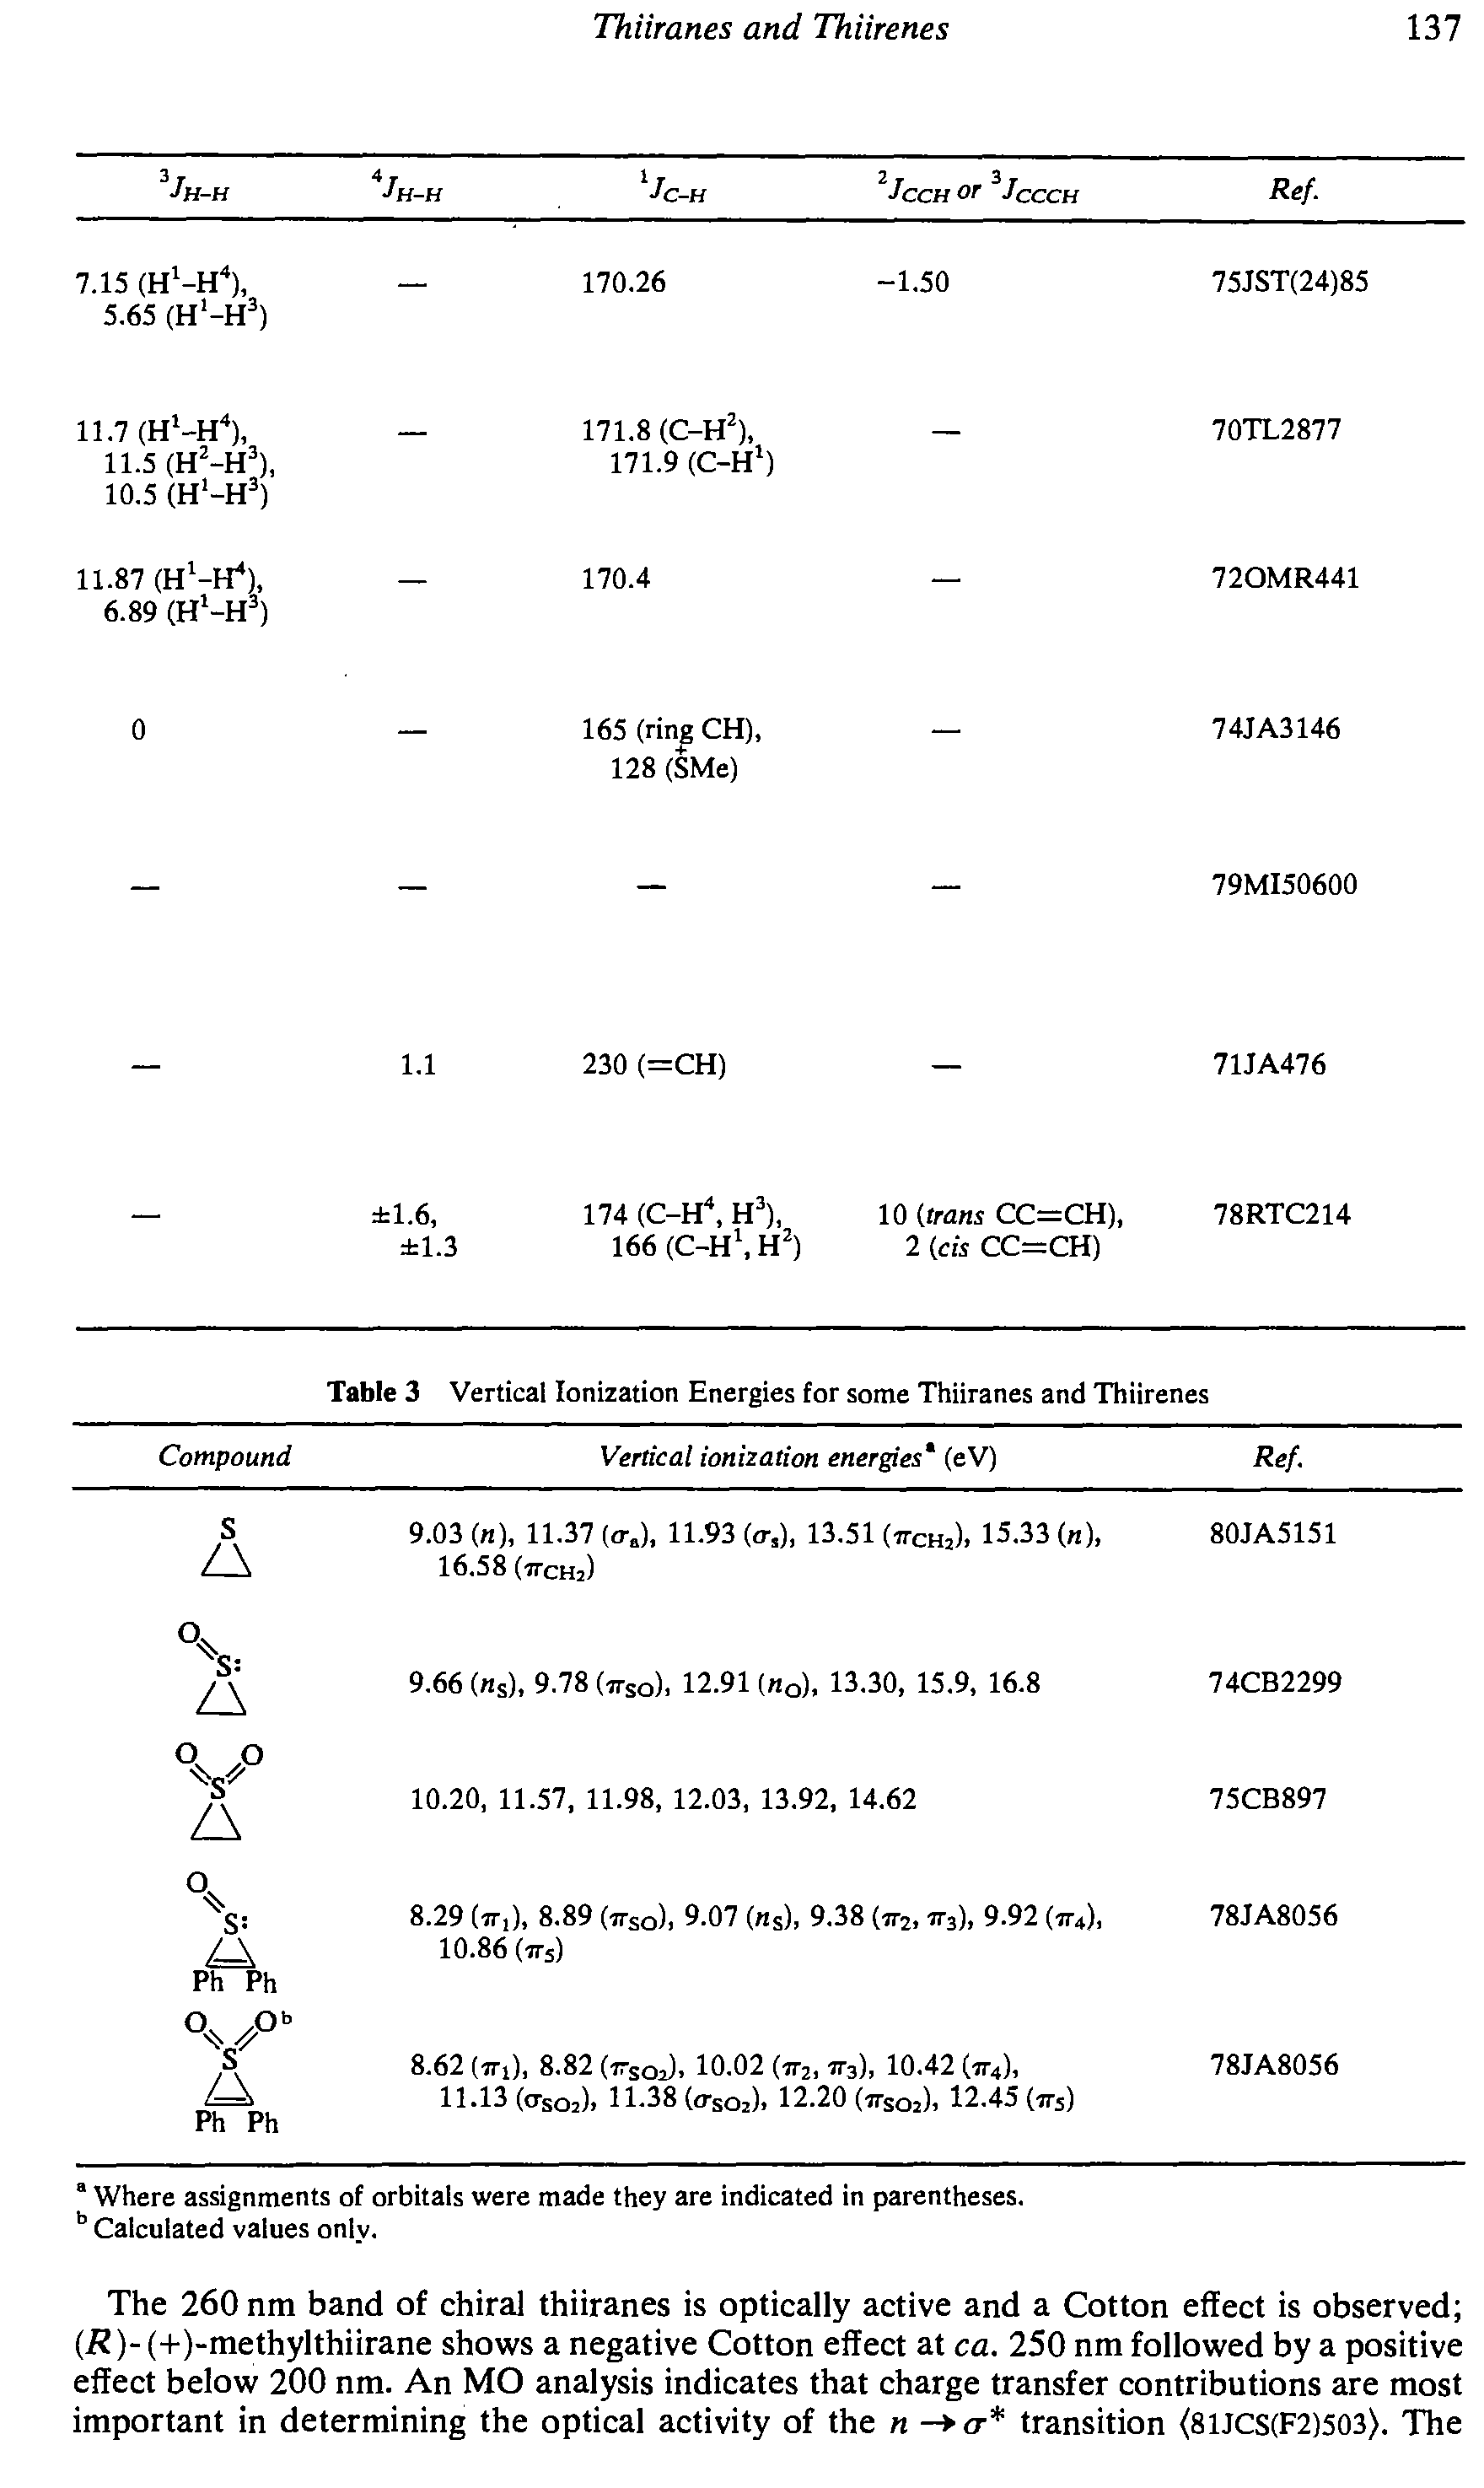 Table 3 Vertical Ionization Energies for some Thiiranes and Thiirenes...